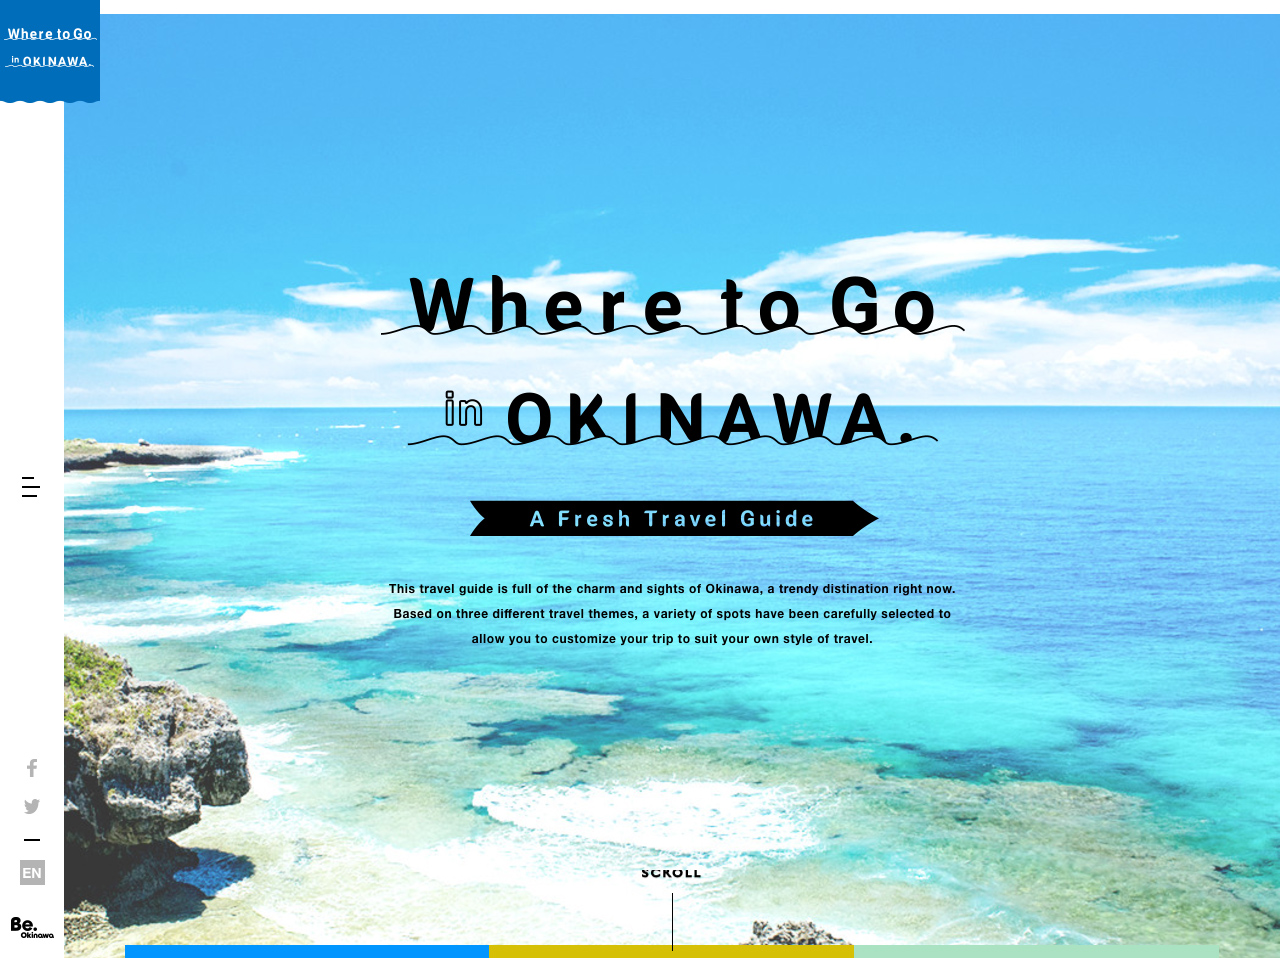 Where to Go in OKINAWA.